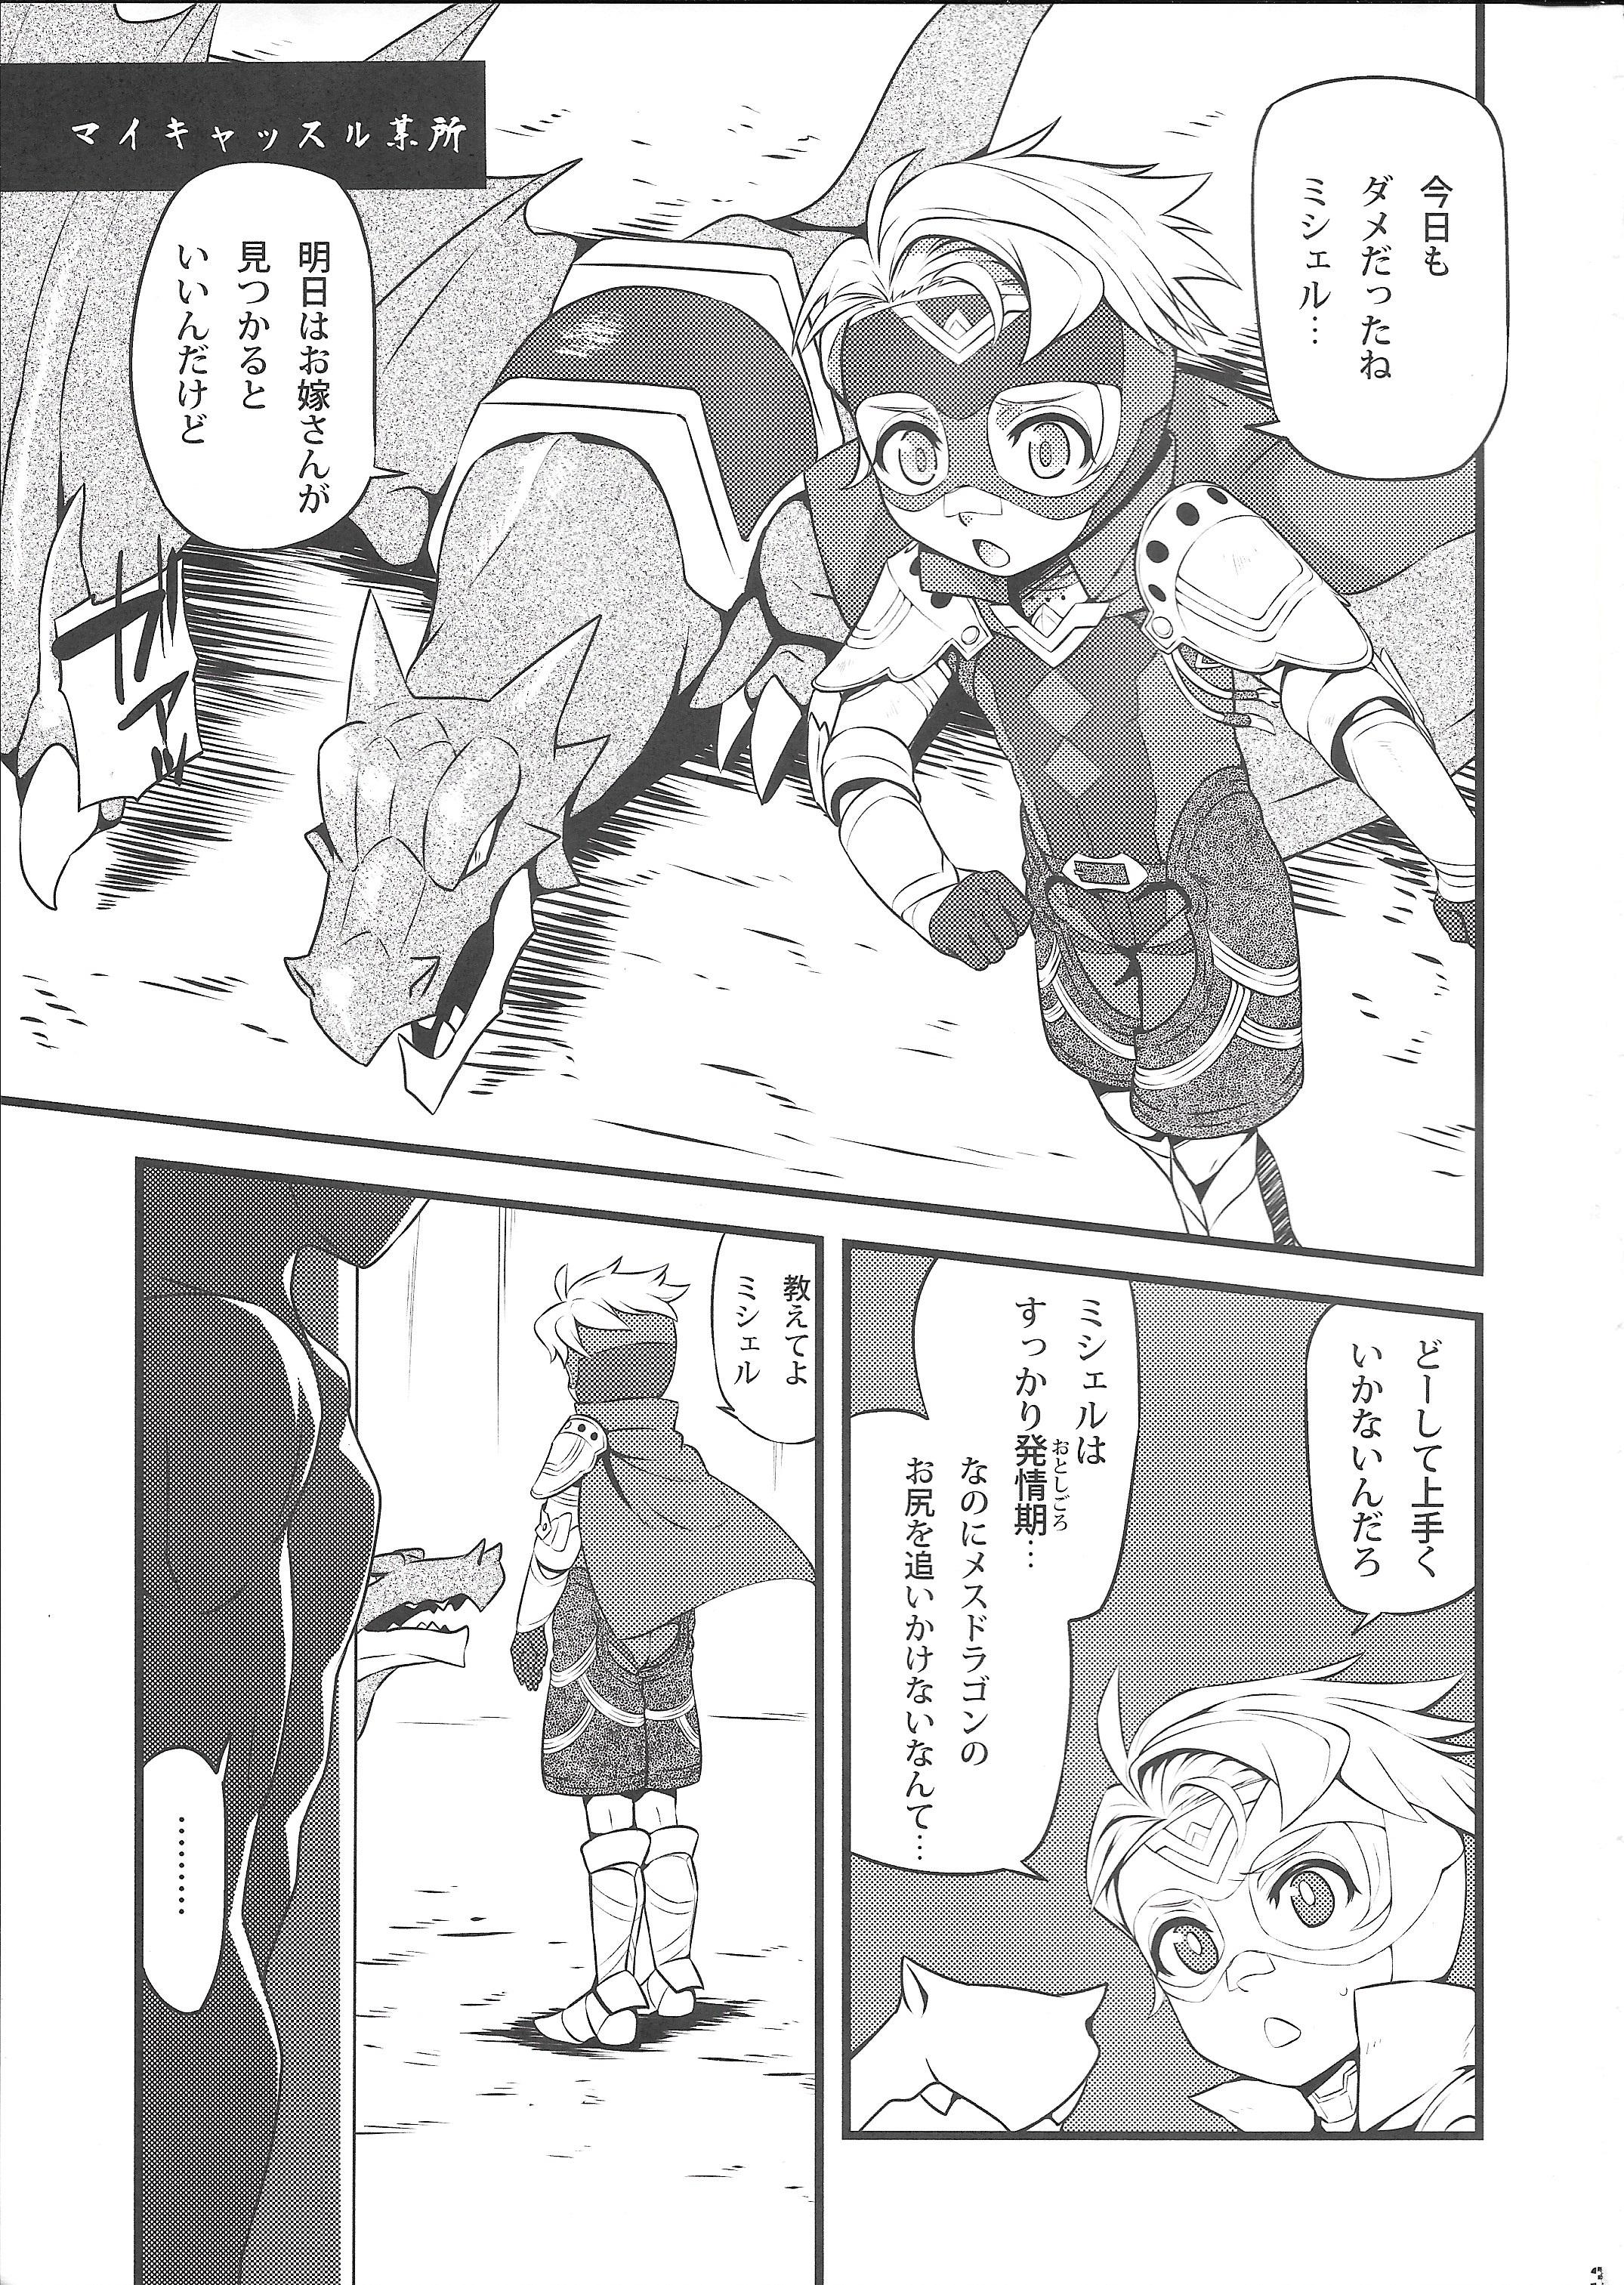 Cheerleader September 5 to 8 - Fire emblem if Wet - Page 2